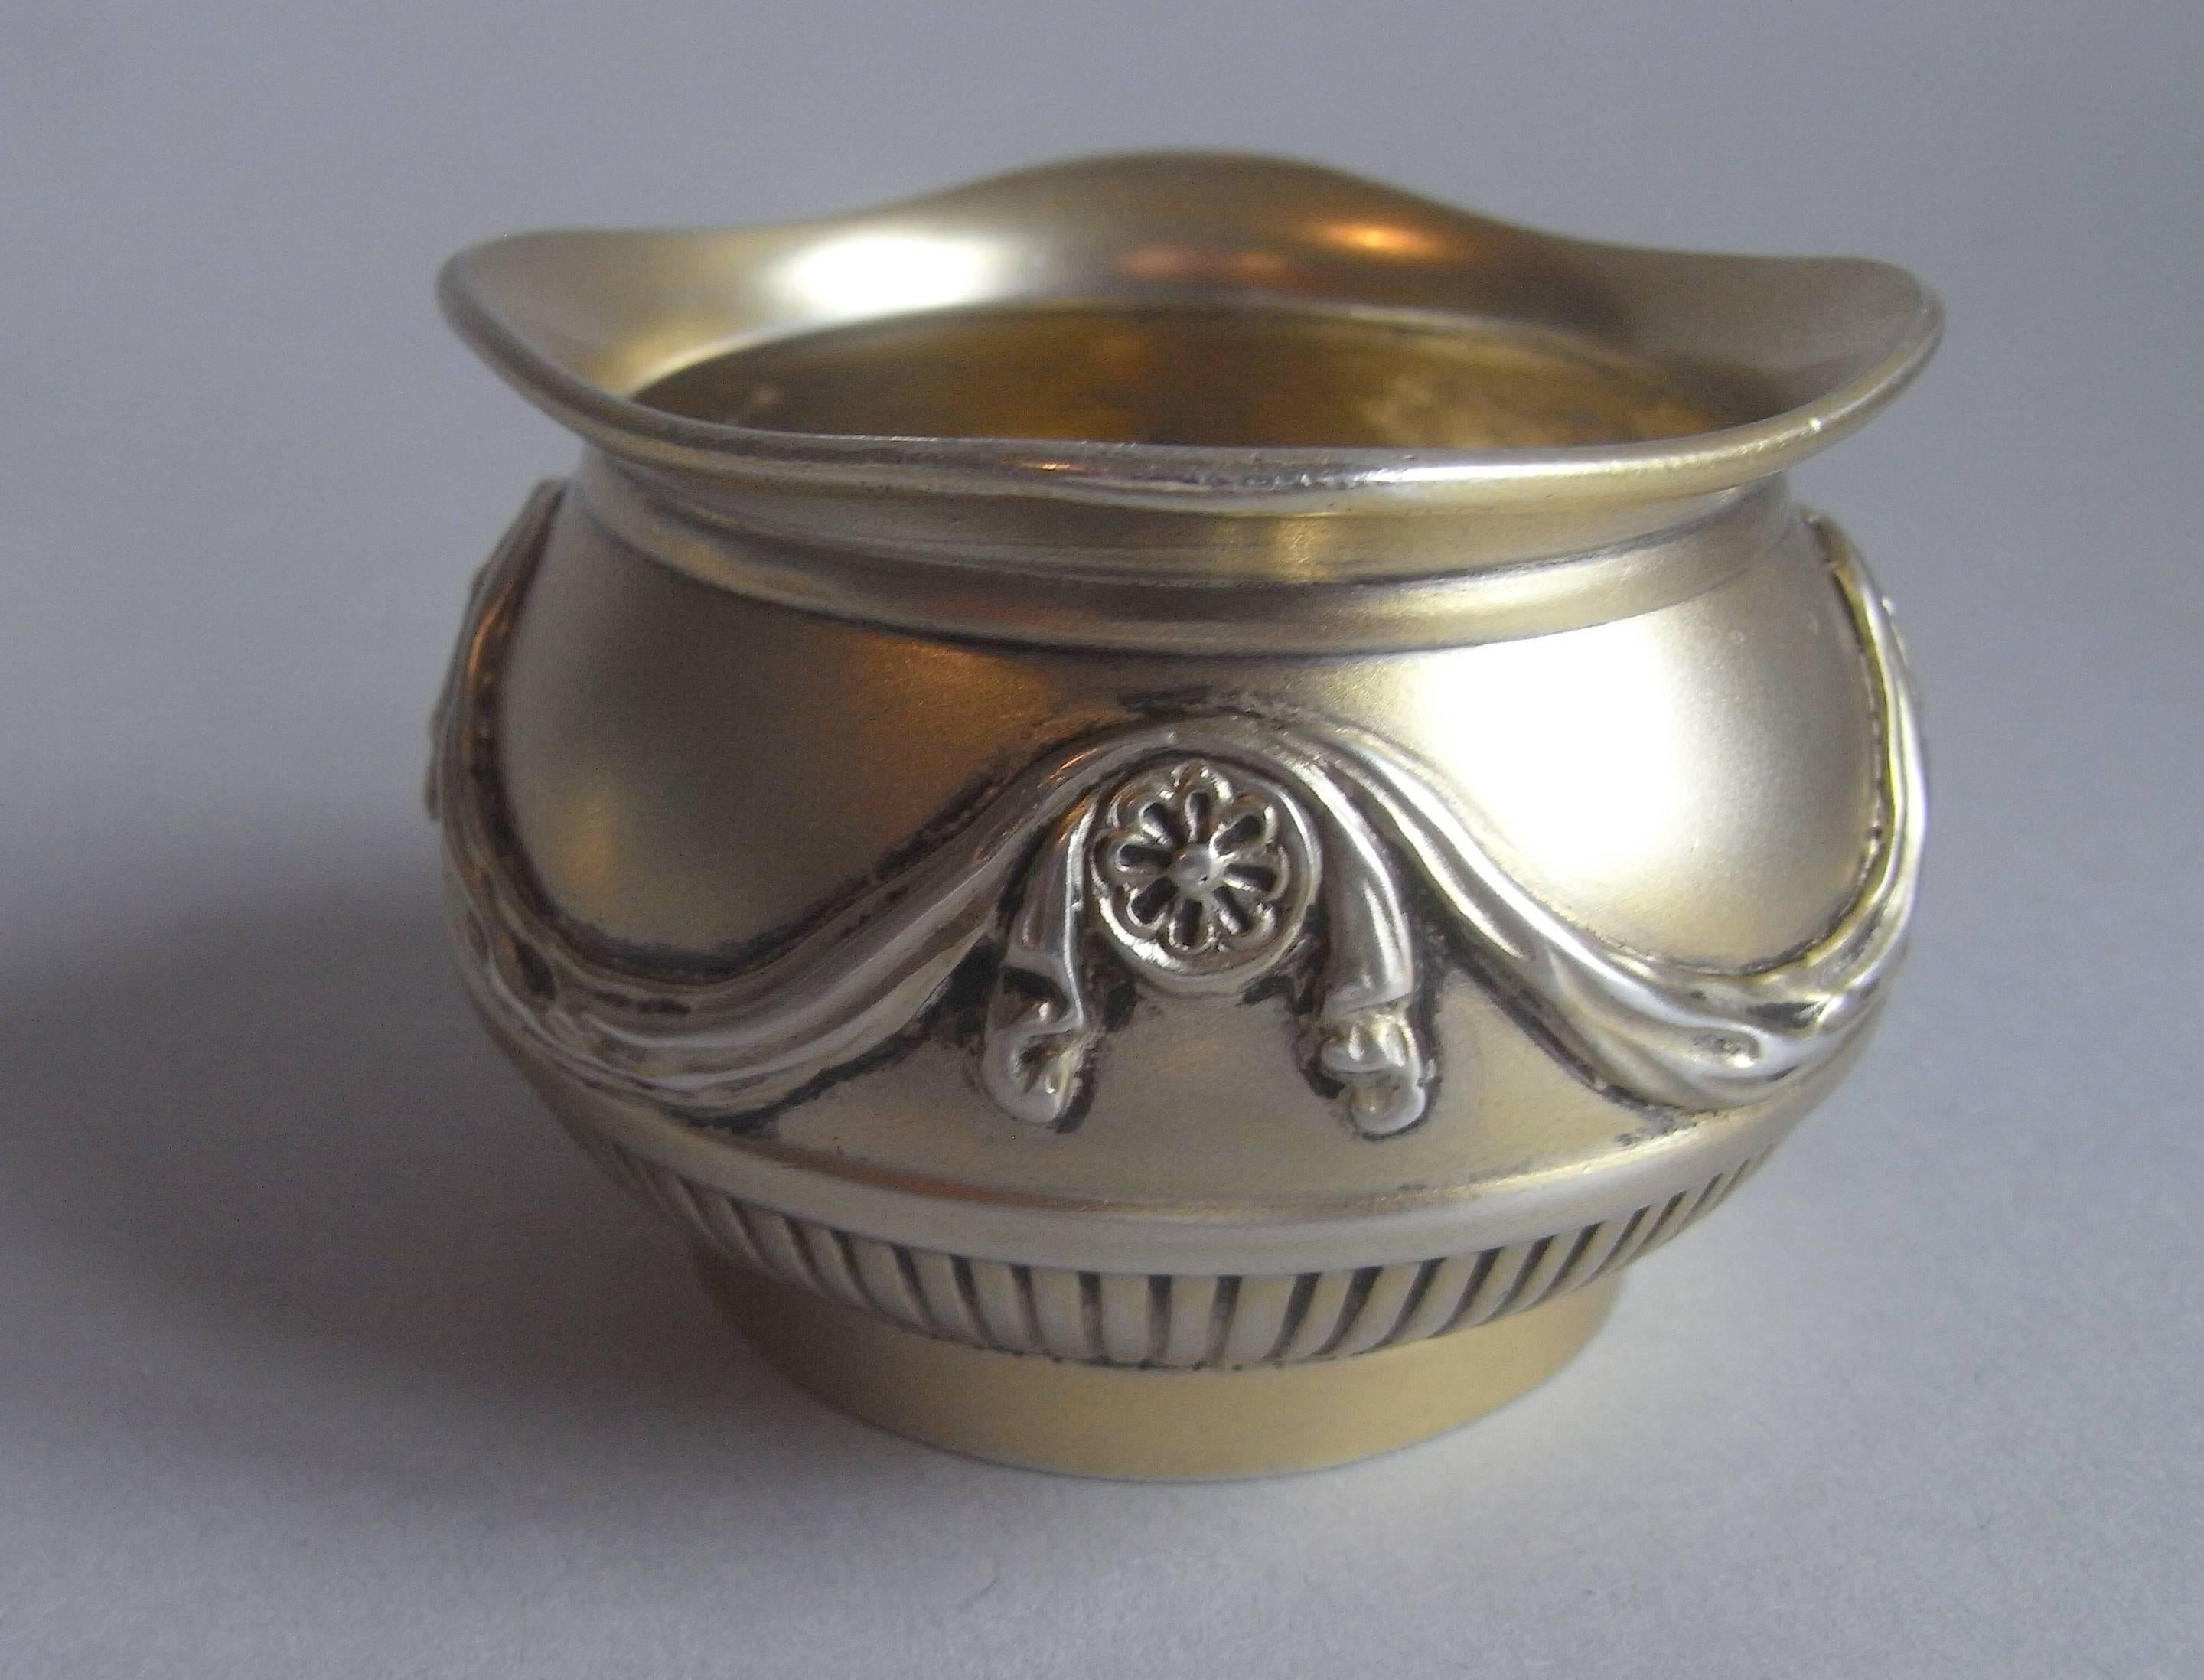 The salt cellars are of a most unusual design and have a baluster form with everted dipping rim. The sides are decorated with a lower lobed band and the upper section is decorated with Classical drapery swags interspersed with paterae. Each is in